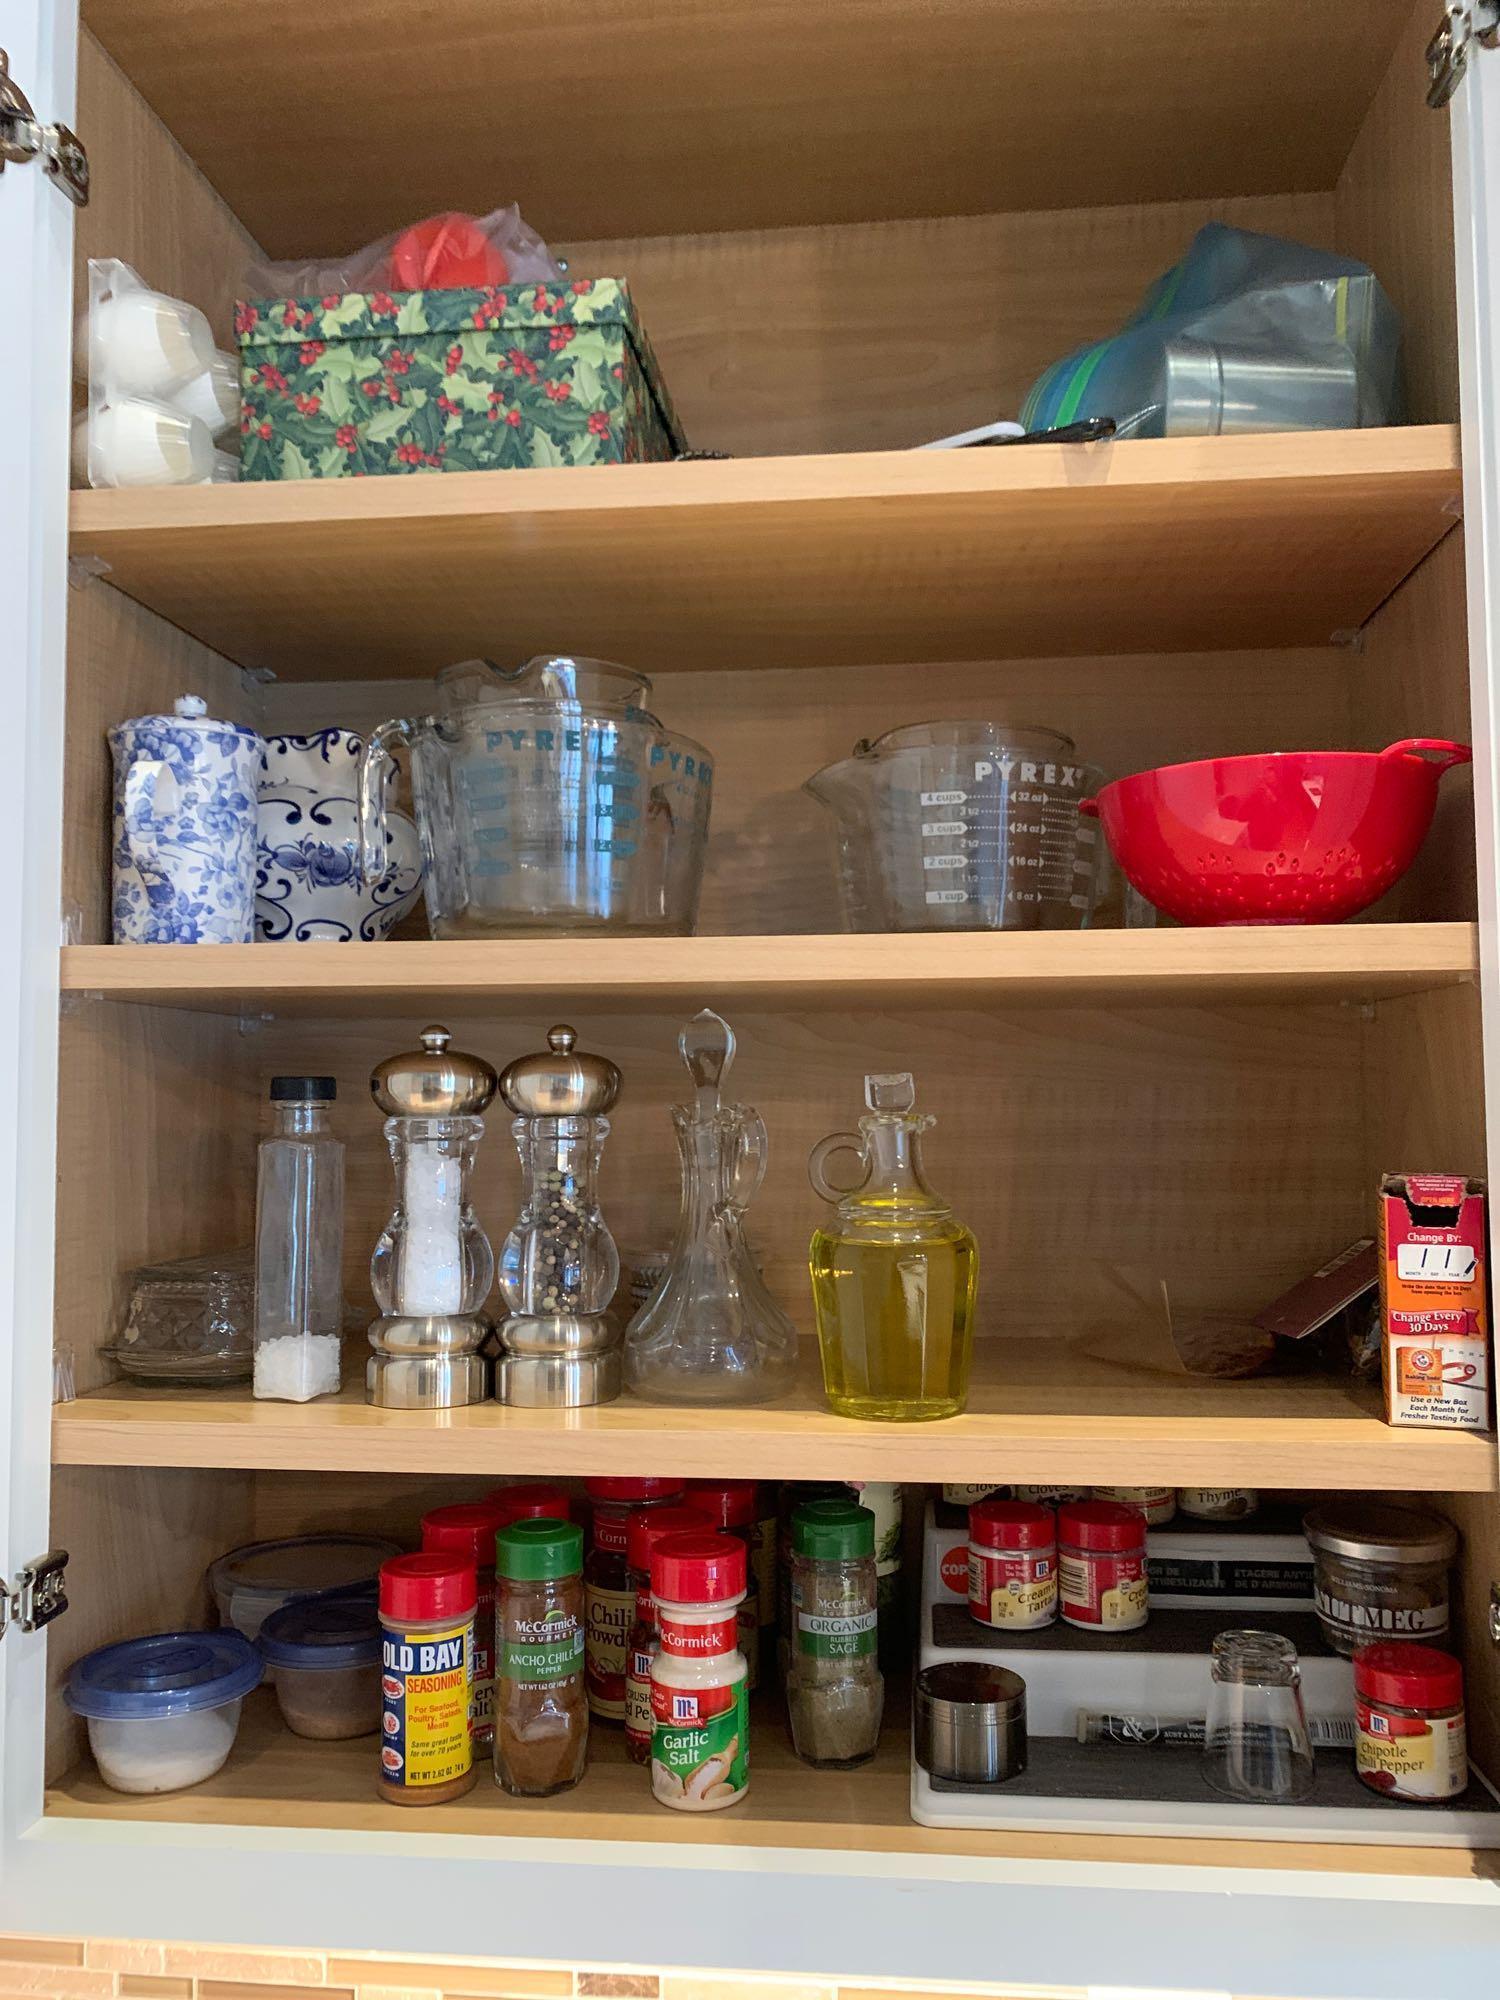 Contents of kitchen cupboards, cookware, dishes and more